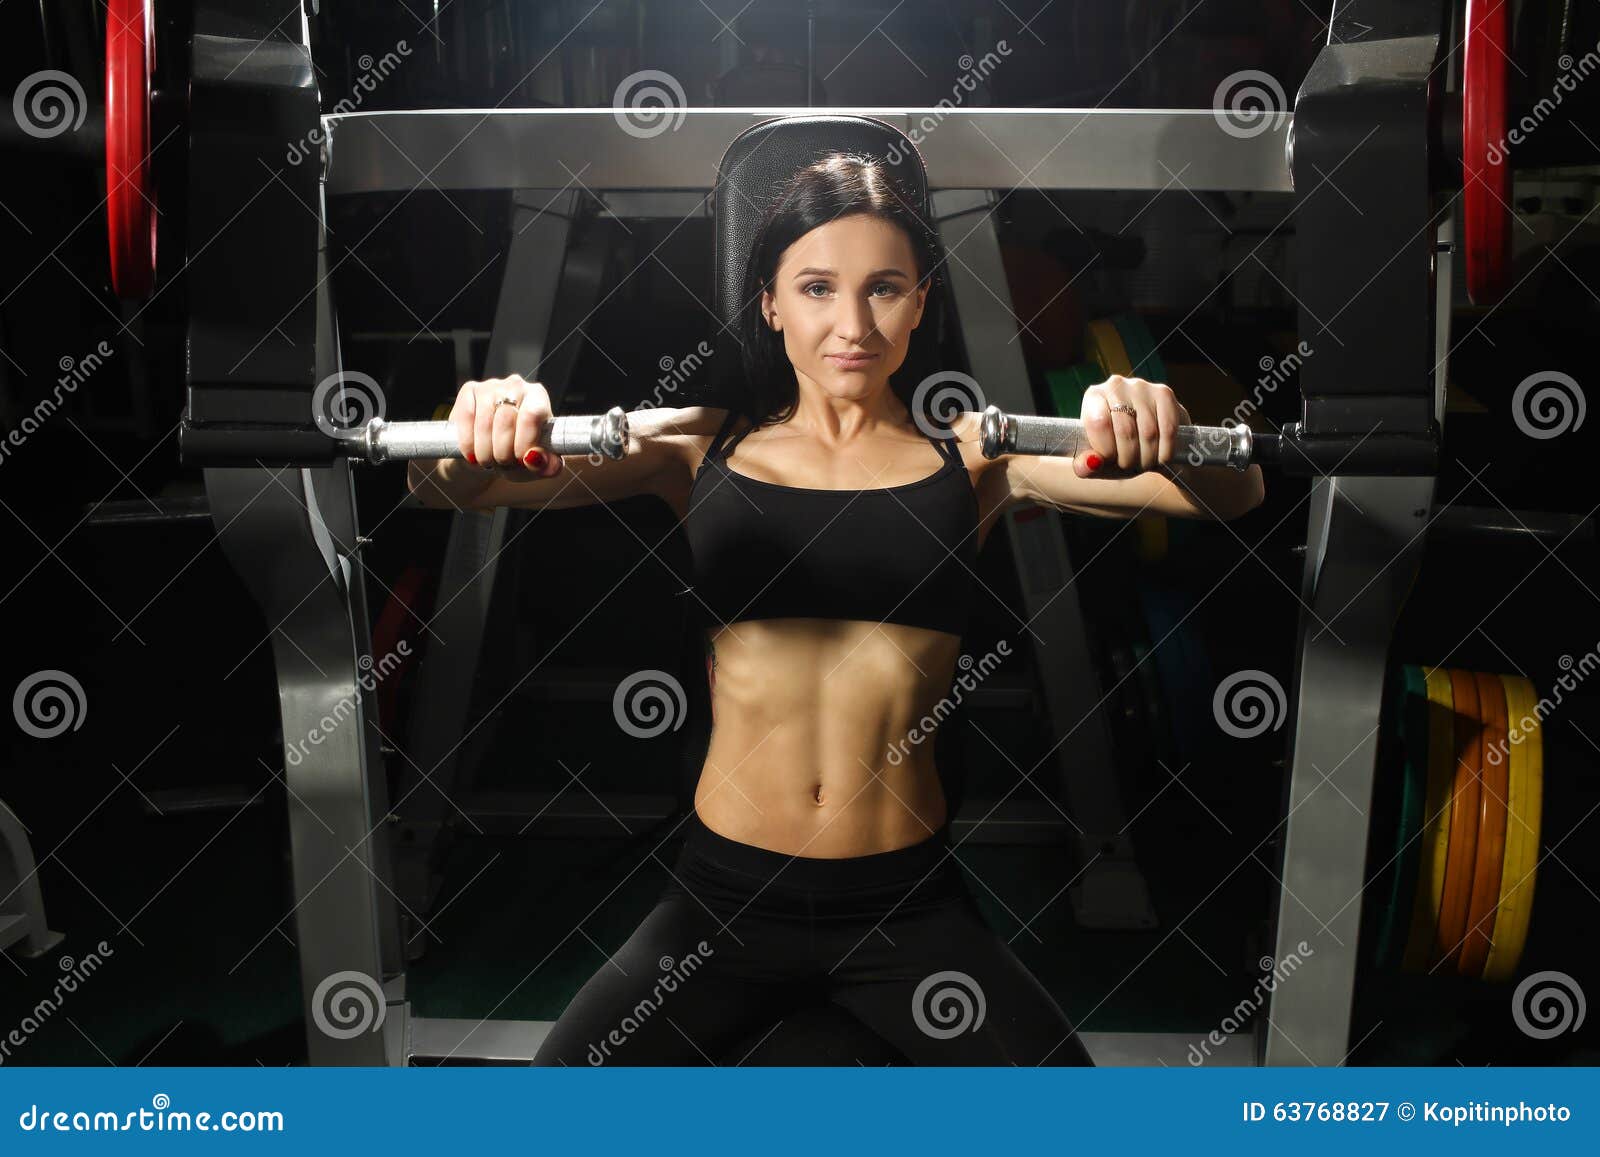 Woman Trains Pecs in the Gym Stock Image - Image of girl, energy: 63768827